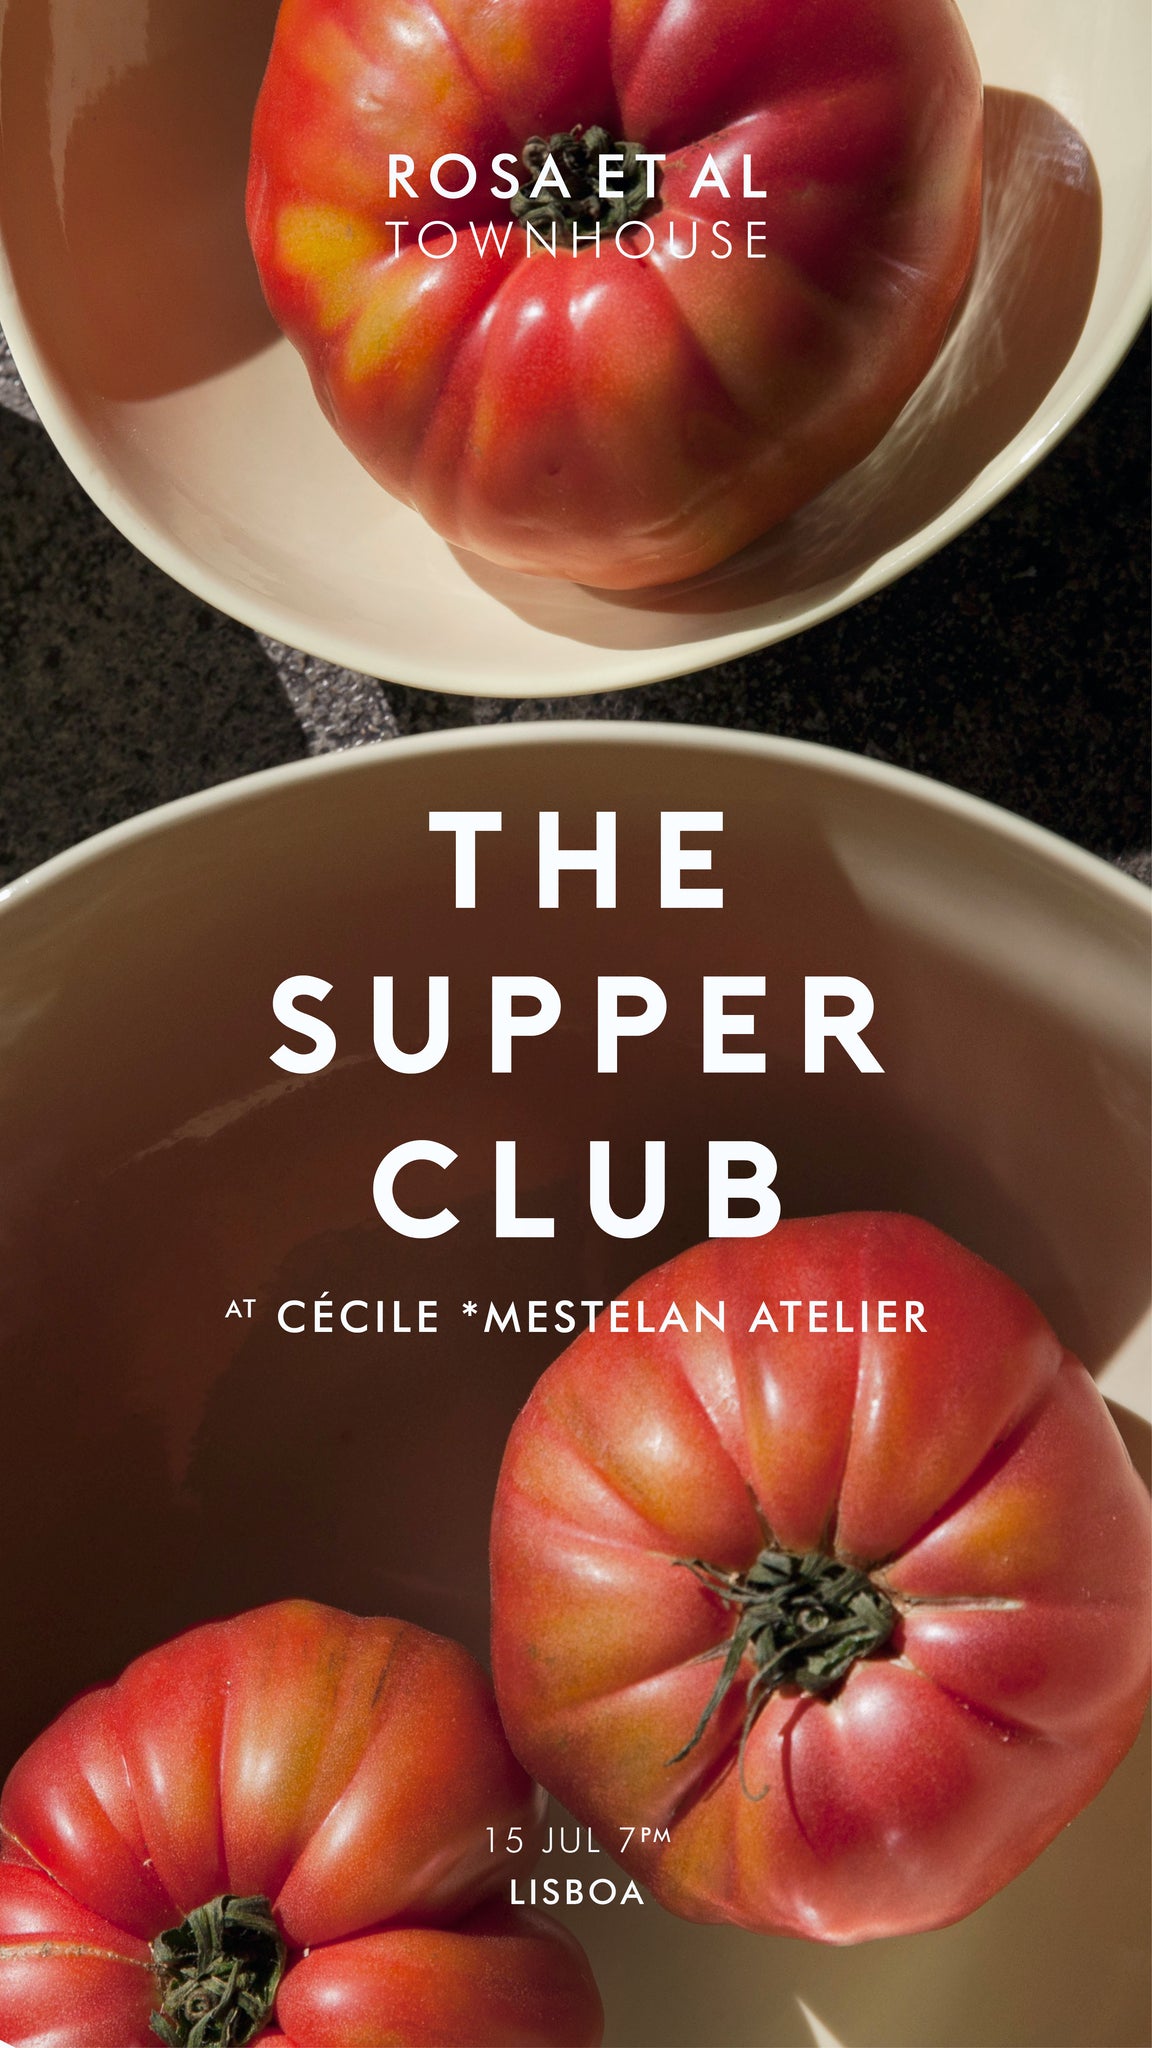 Townhouse Supper Club